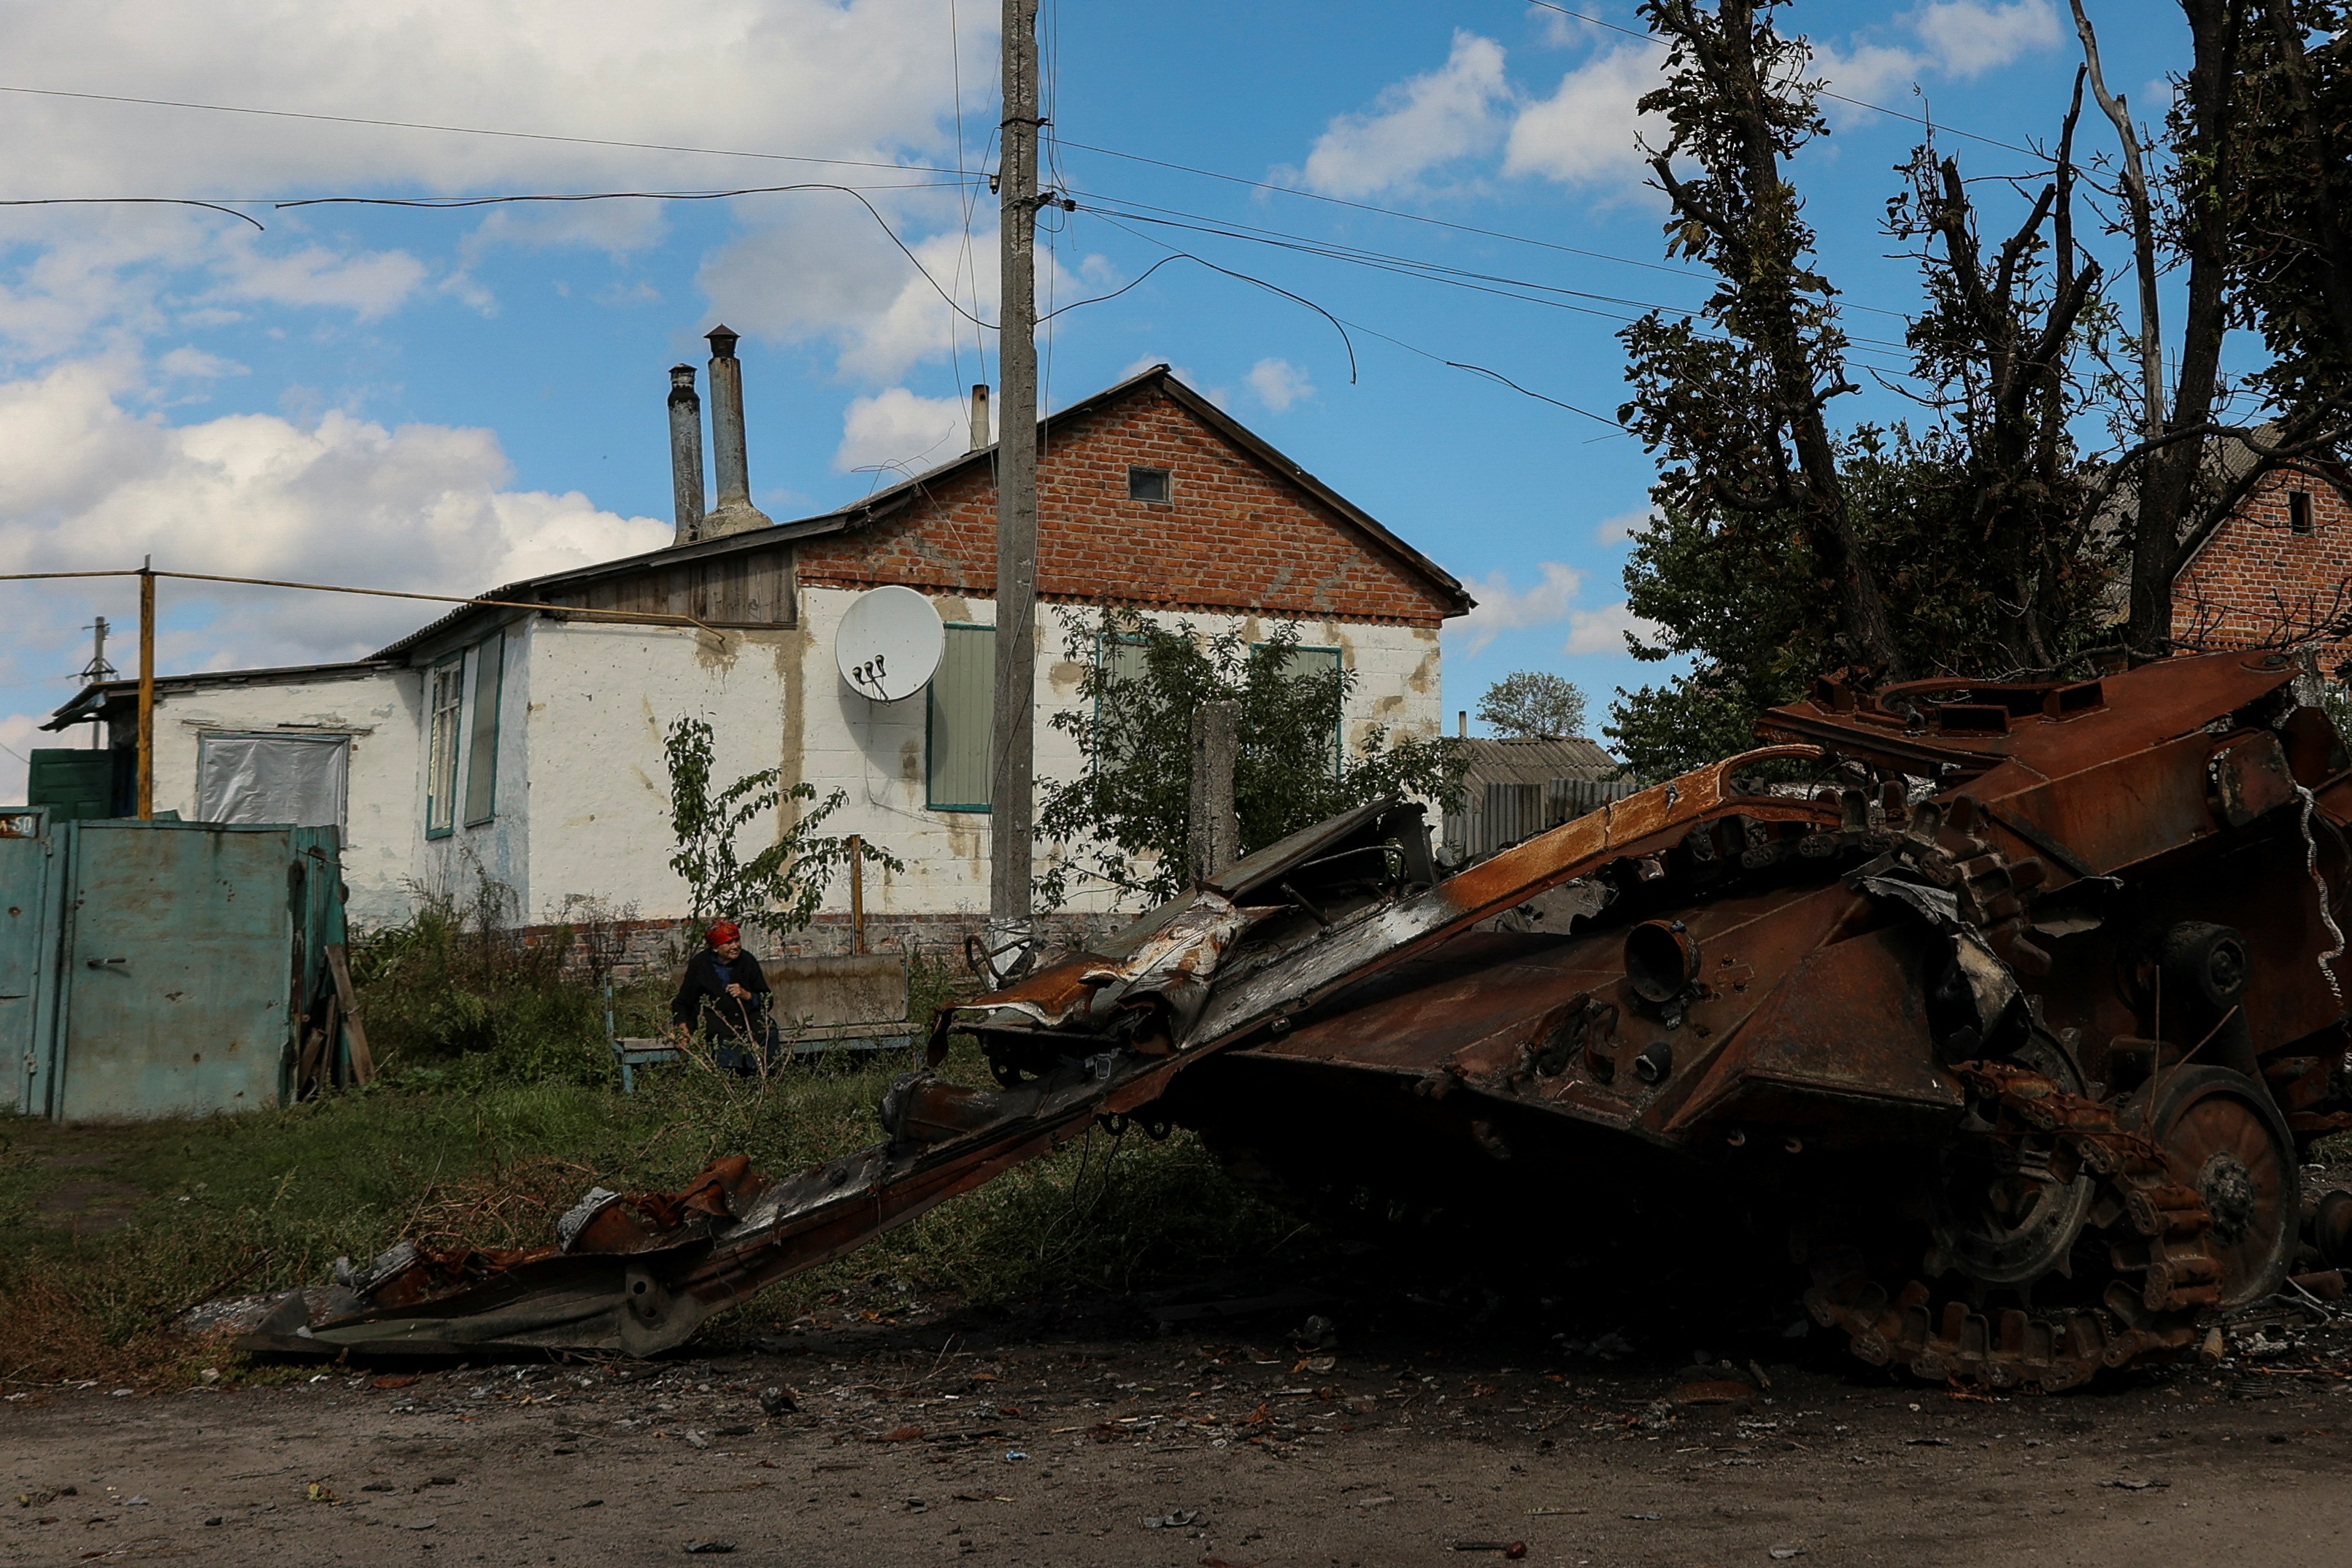 Woman looks at a destroyed Russian armoured fighting vehicle as she rests on a bench in the town of Balakliia